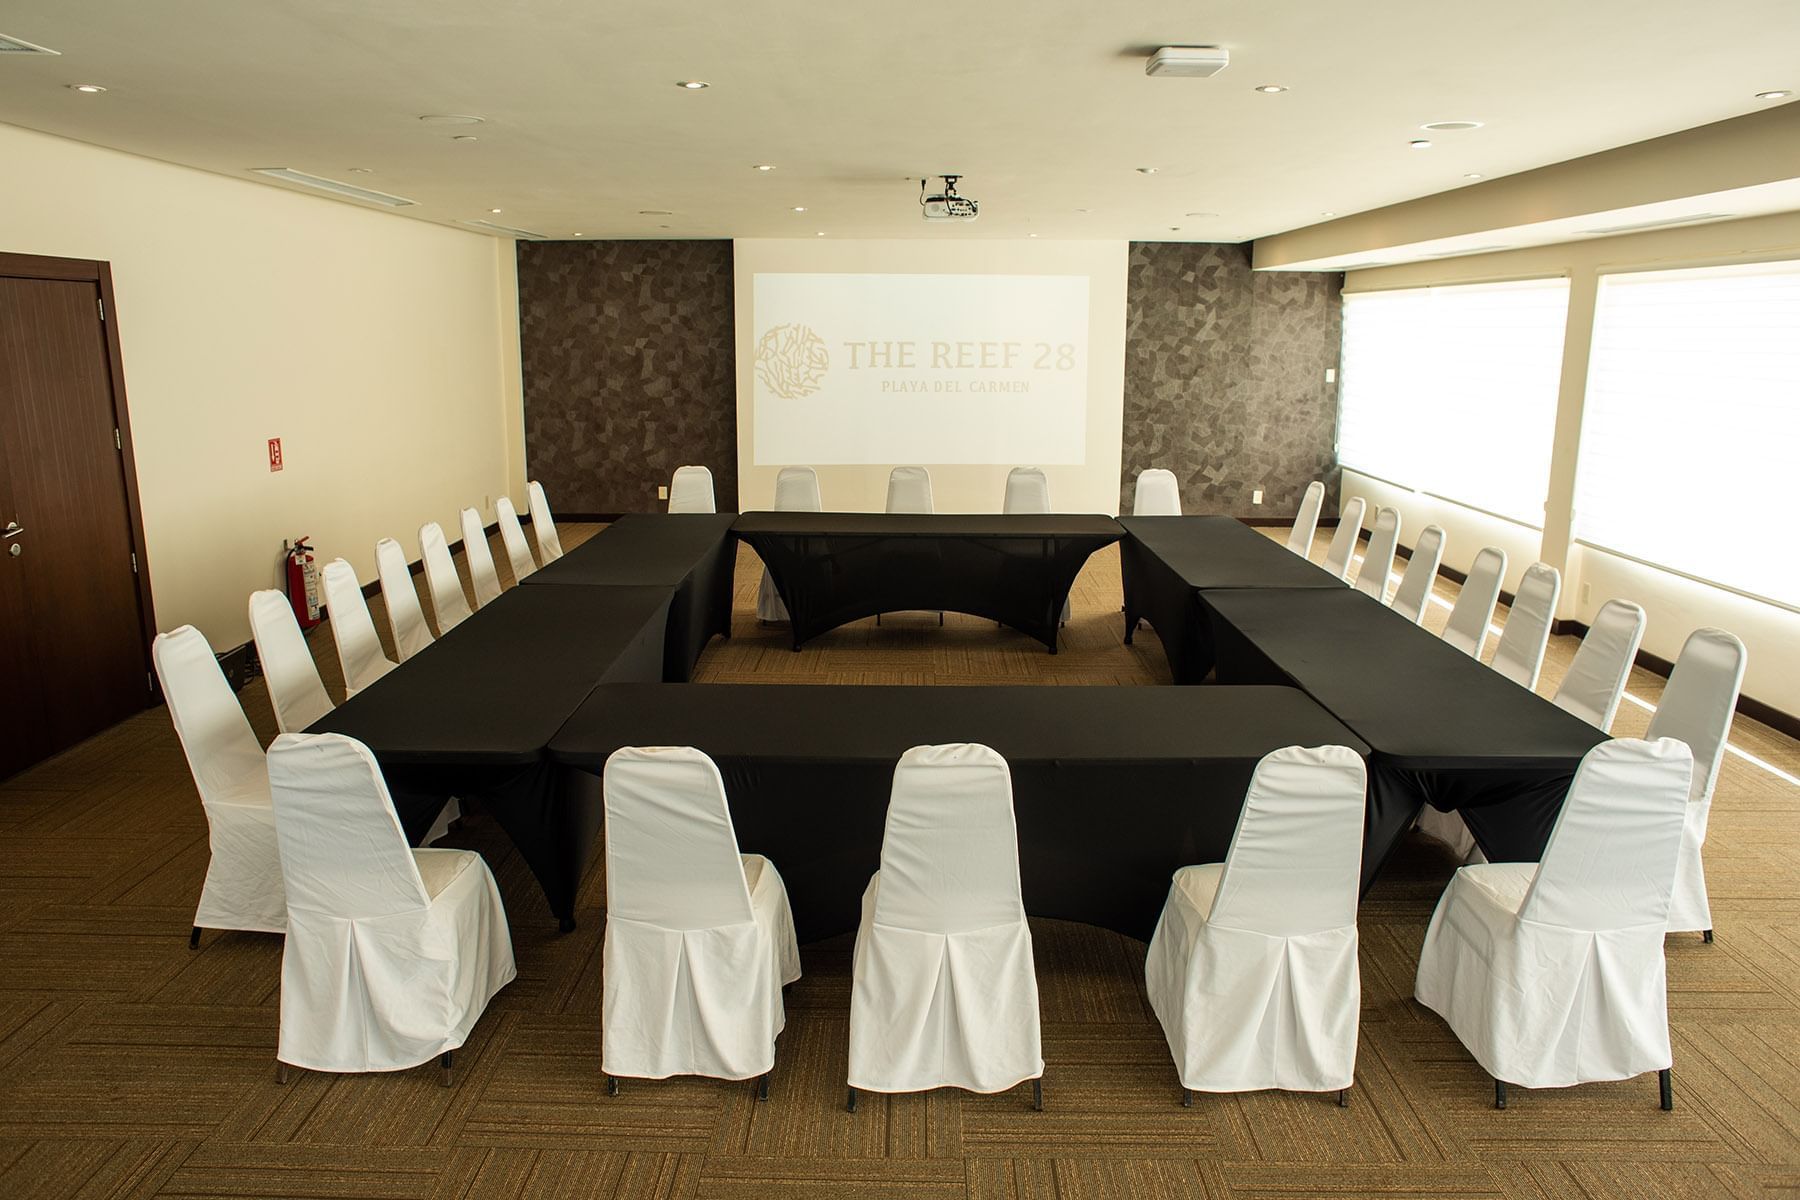 Meeting space with boardroom table set up at The Reef 28